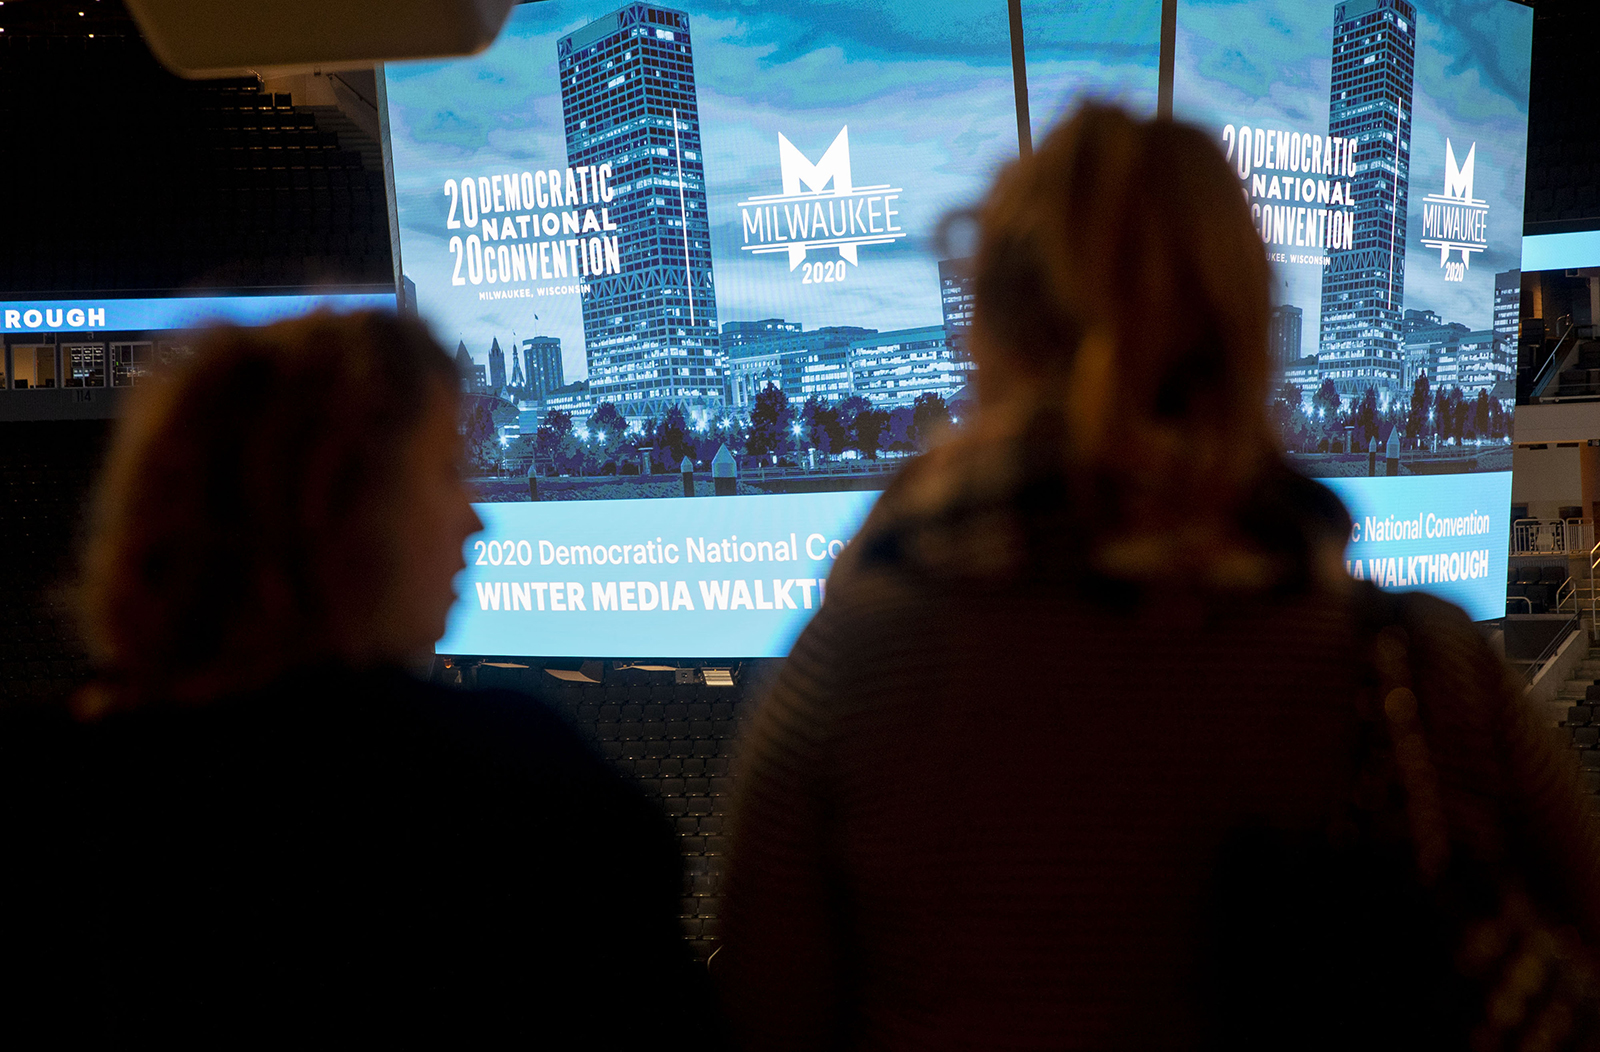 Signage is displayed during a media walkthrough for the upcoming Democratic National Convention at the Fiserv Forum in Milwaukee, on Tuesday, January 7.